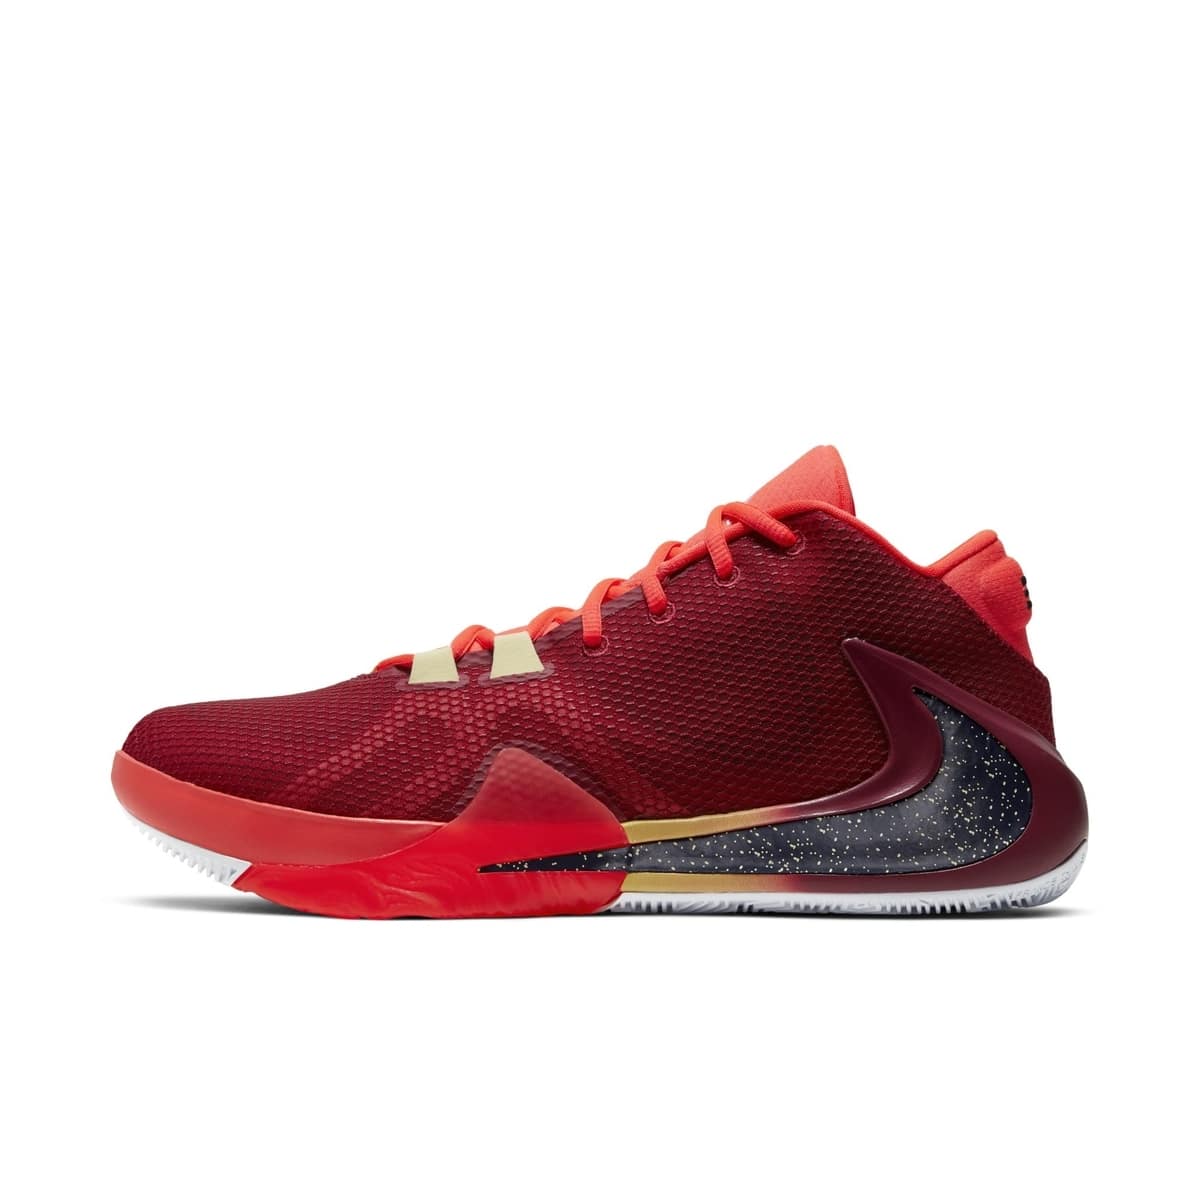 The Nike Zoom Freak 1 to Release in an 